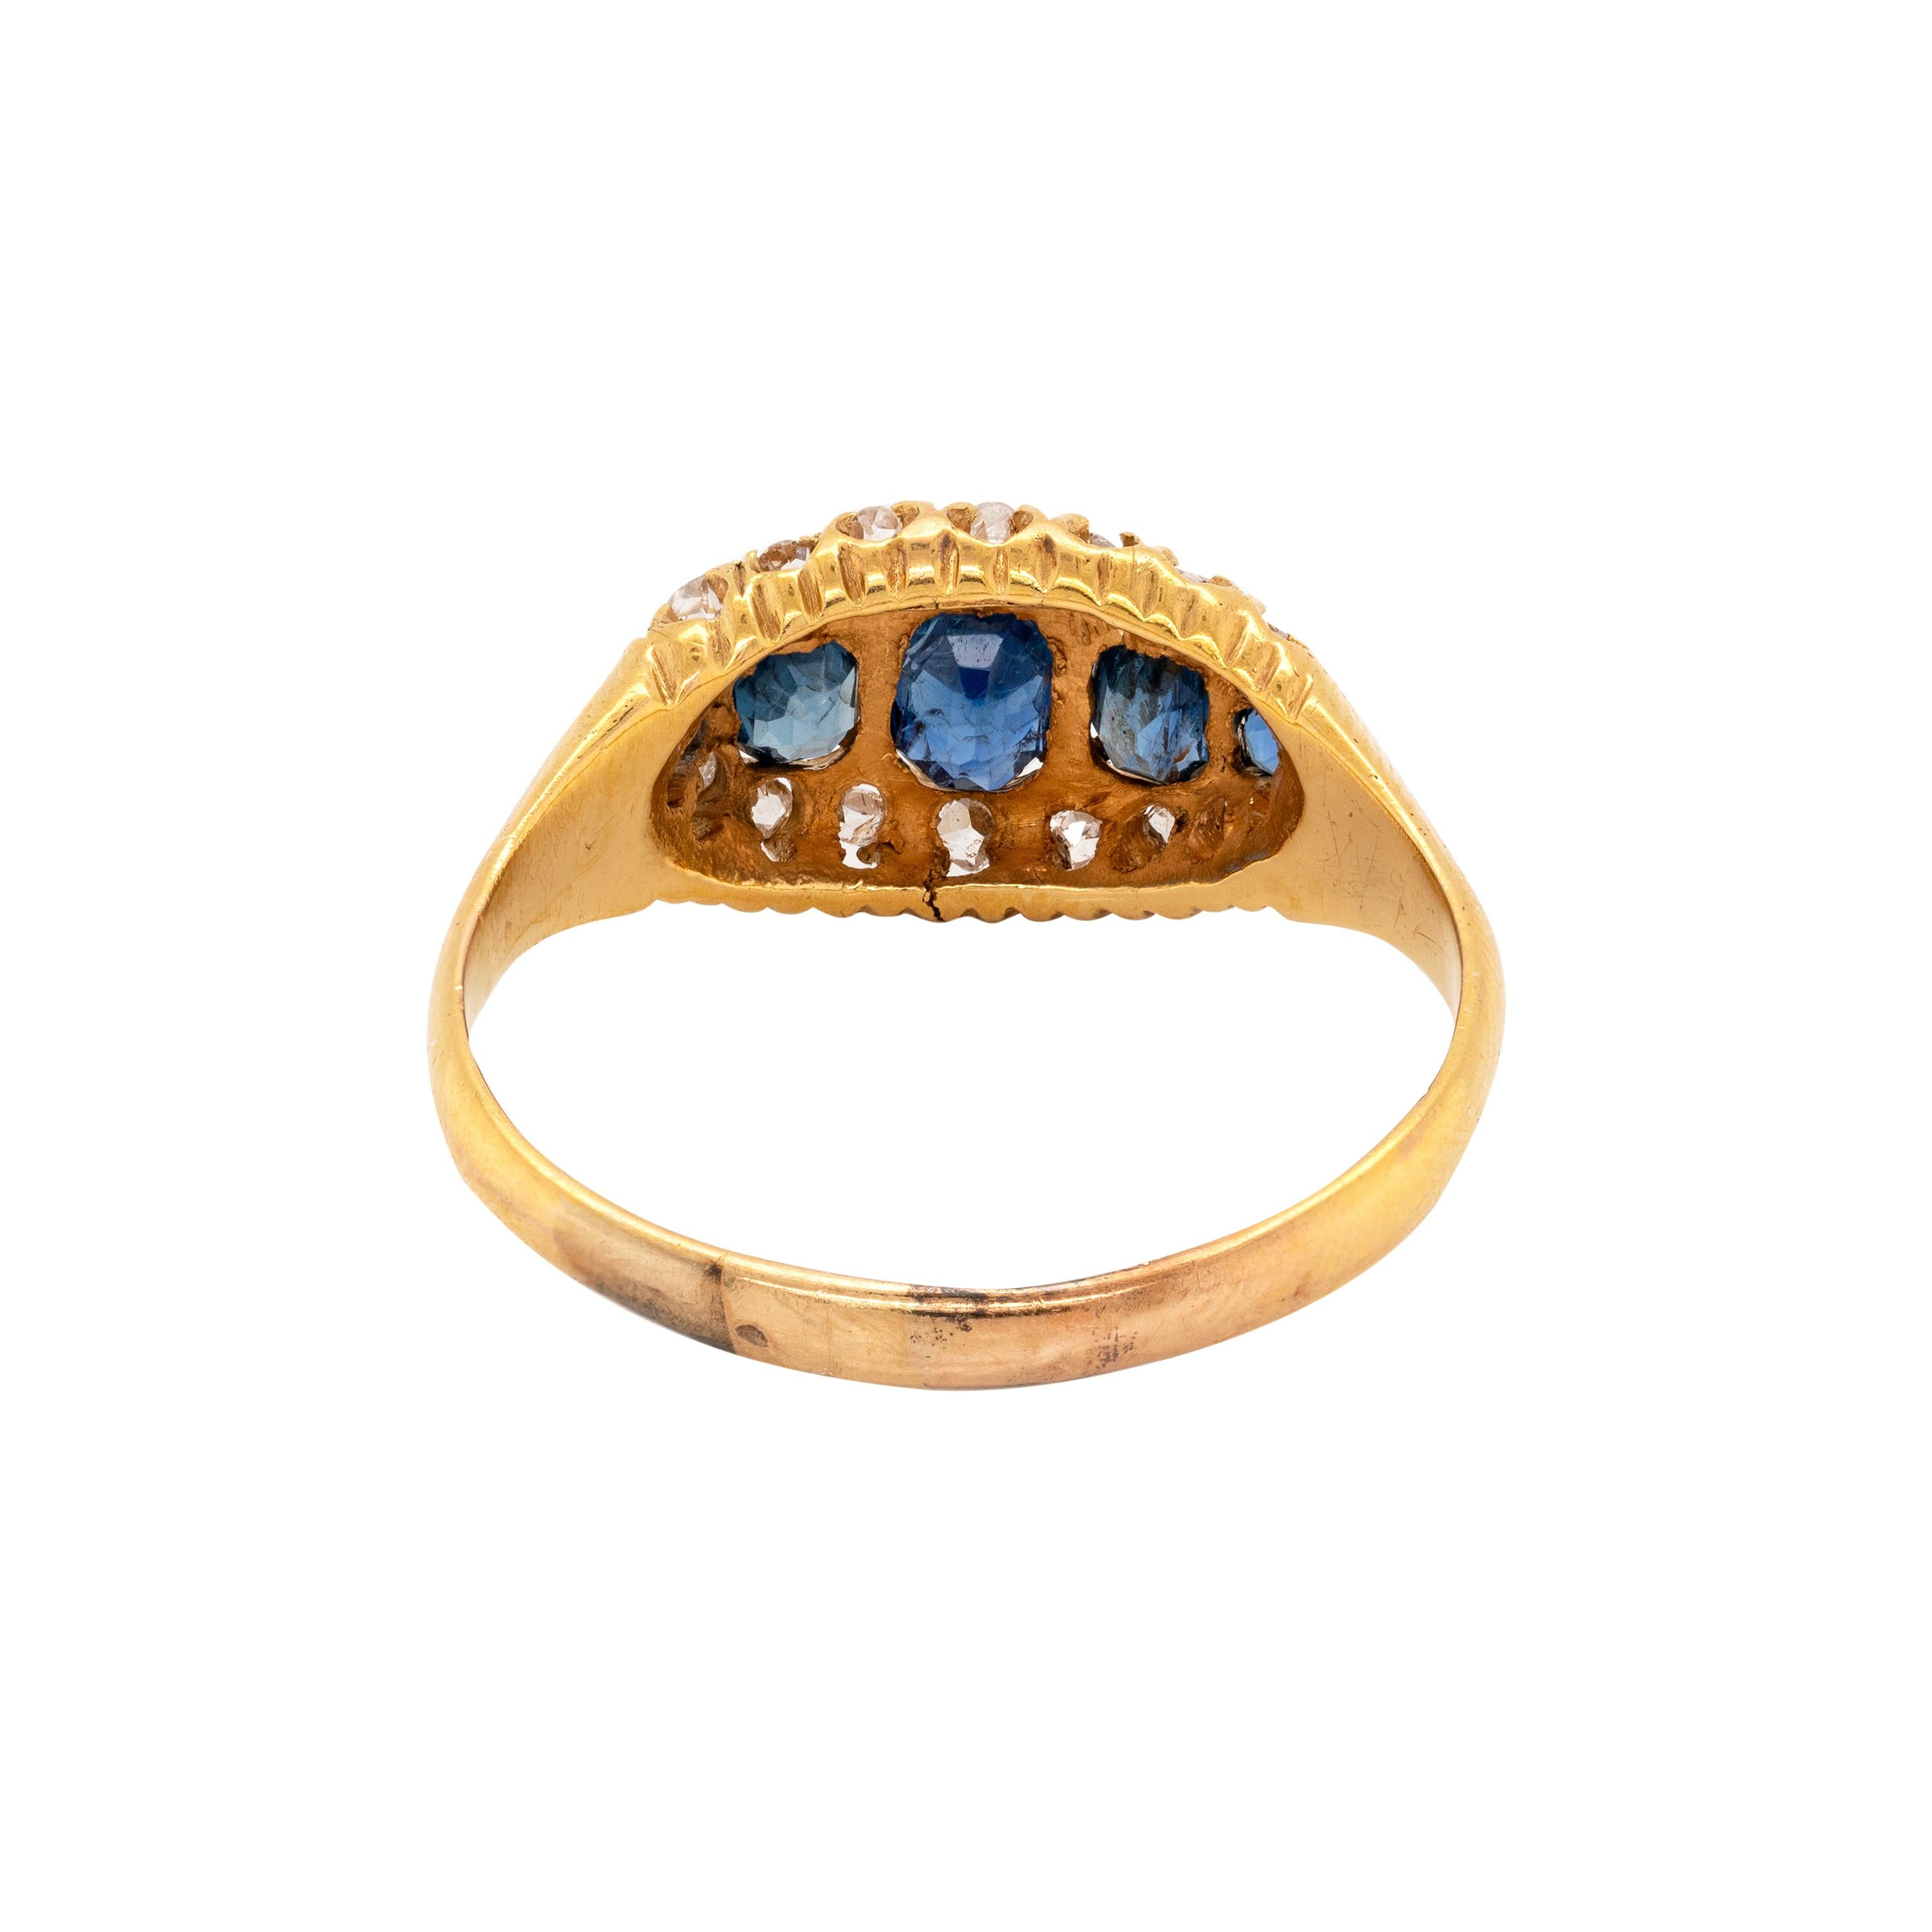 Late Victorian Antique Blue Sapphire and Old Cut Diamond 18 Carat Yellow Gold Ring, Circa 1890s For Sale